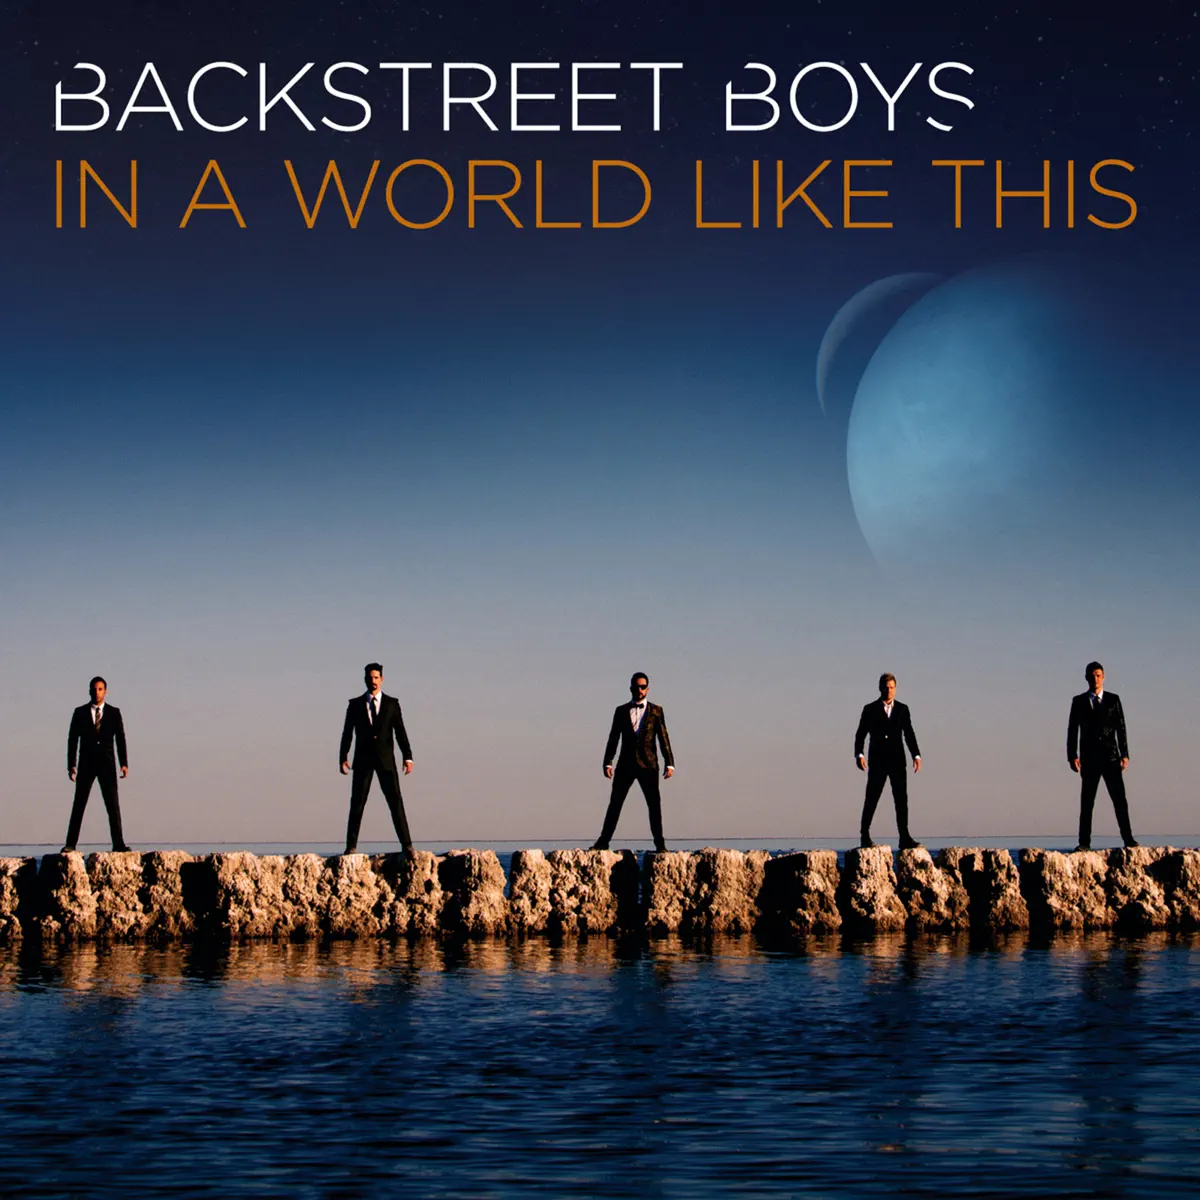 Backstreet Boys - In a World Like This (Deluxe World Tour Edition) (2014) [iTunes Plus AAC M4A]-新房子